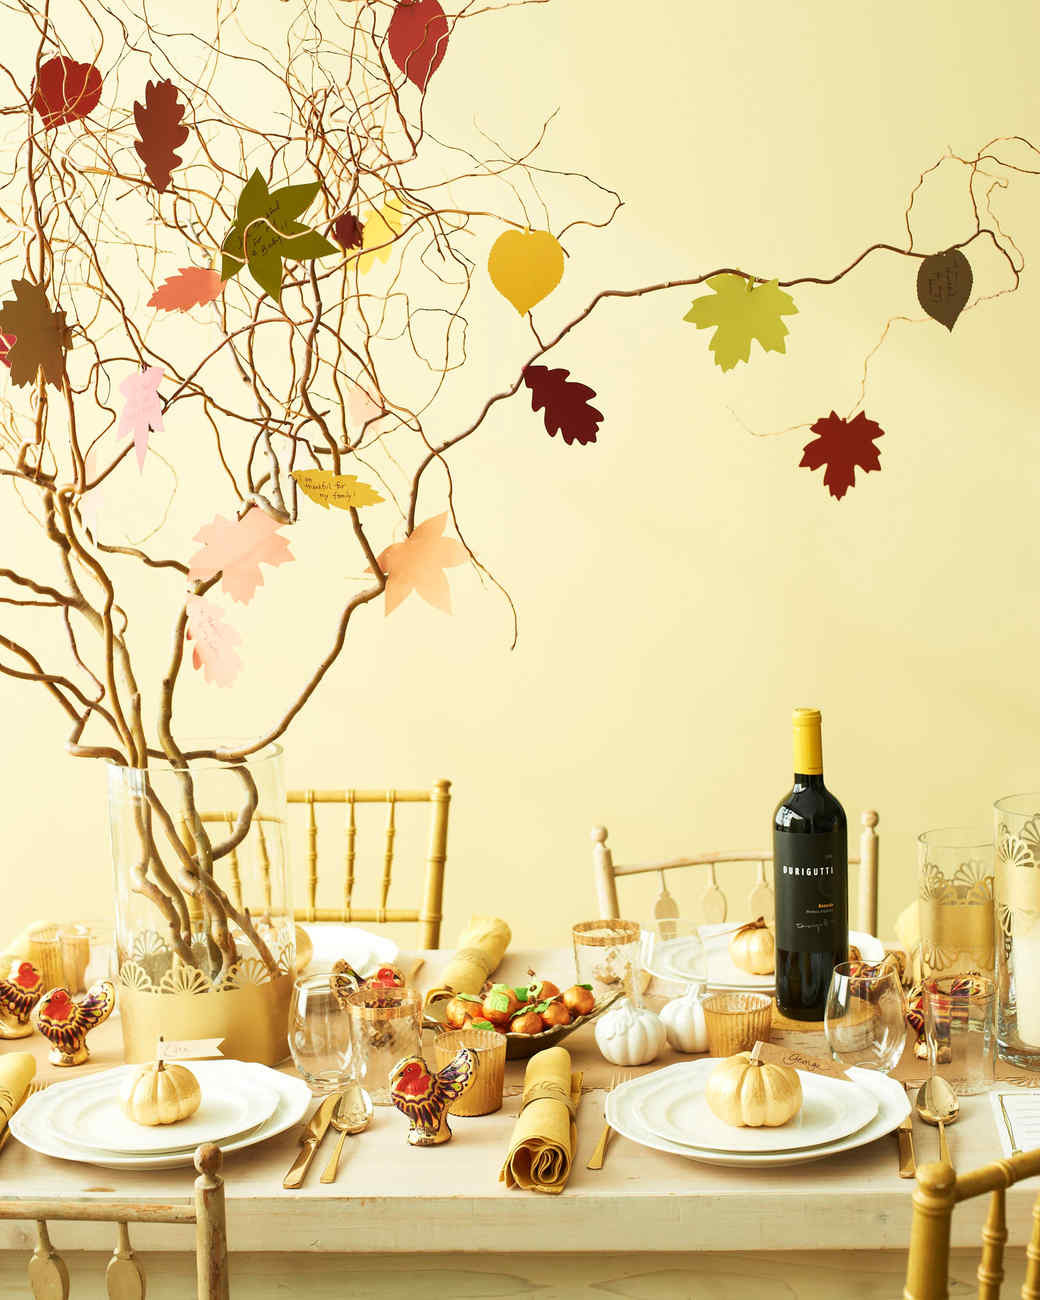 Thanksgiving Table Settings Martha Stewart
 Tree Centerpieces Time to Branch Out with Your Table Displays